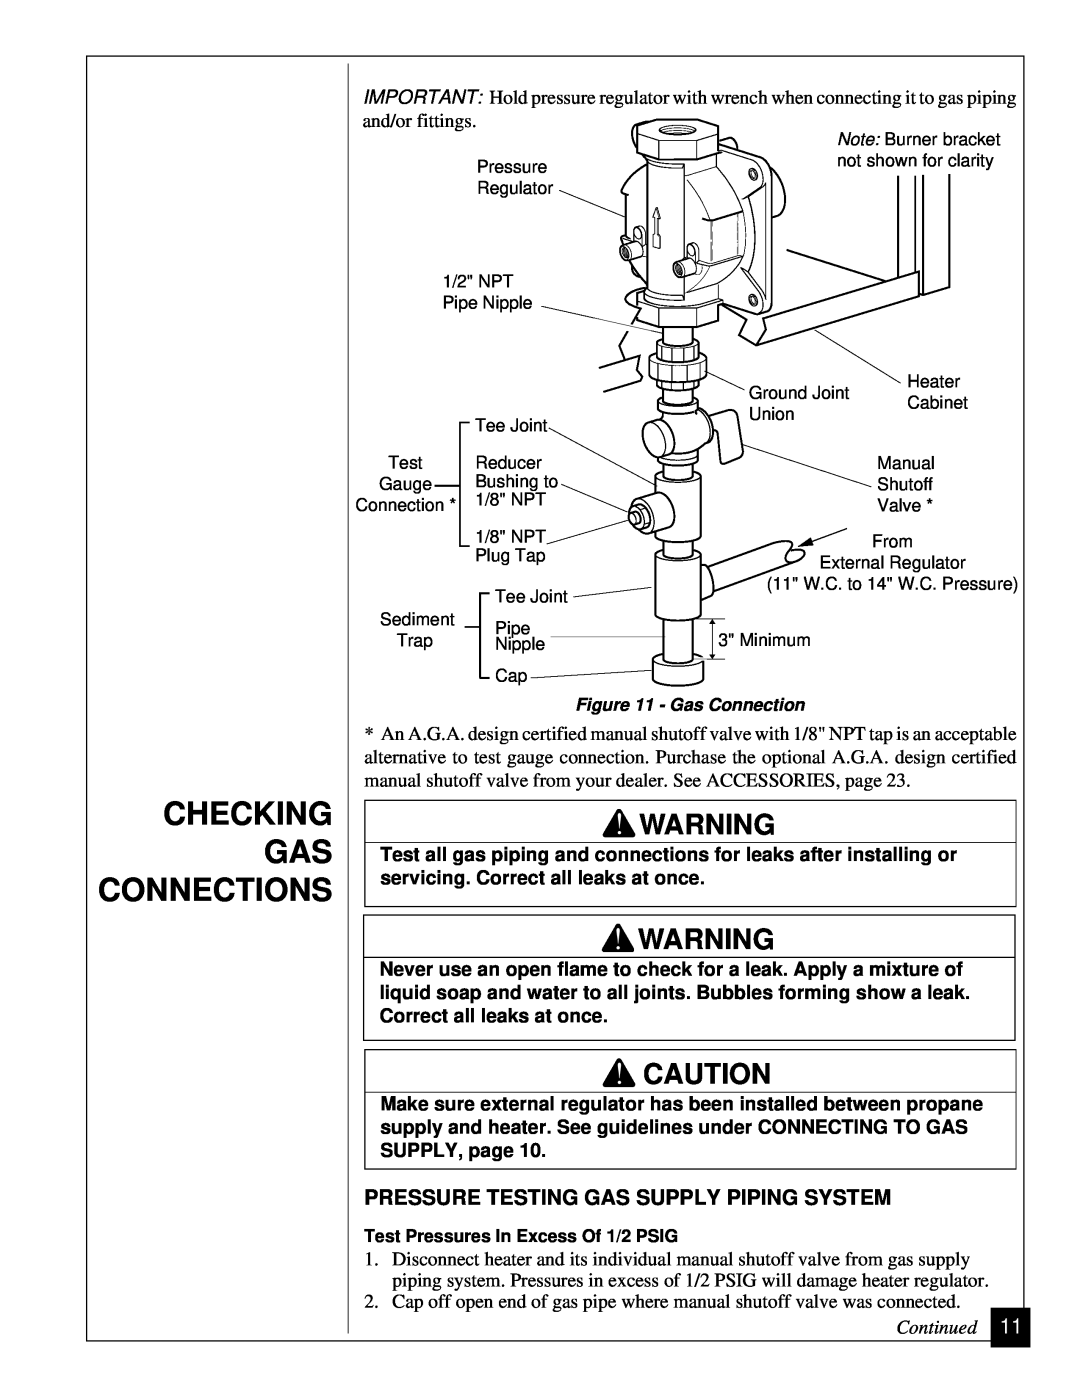 Desa VGP30 installation manual Checking Gas Connections, Pressure Testing Gas Supply Piping System 